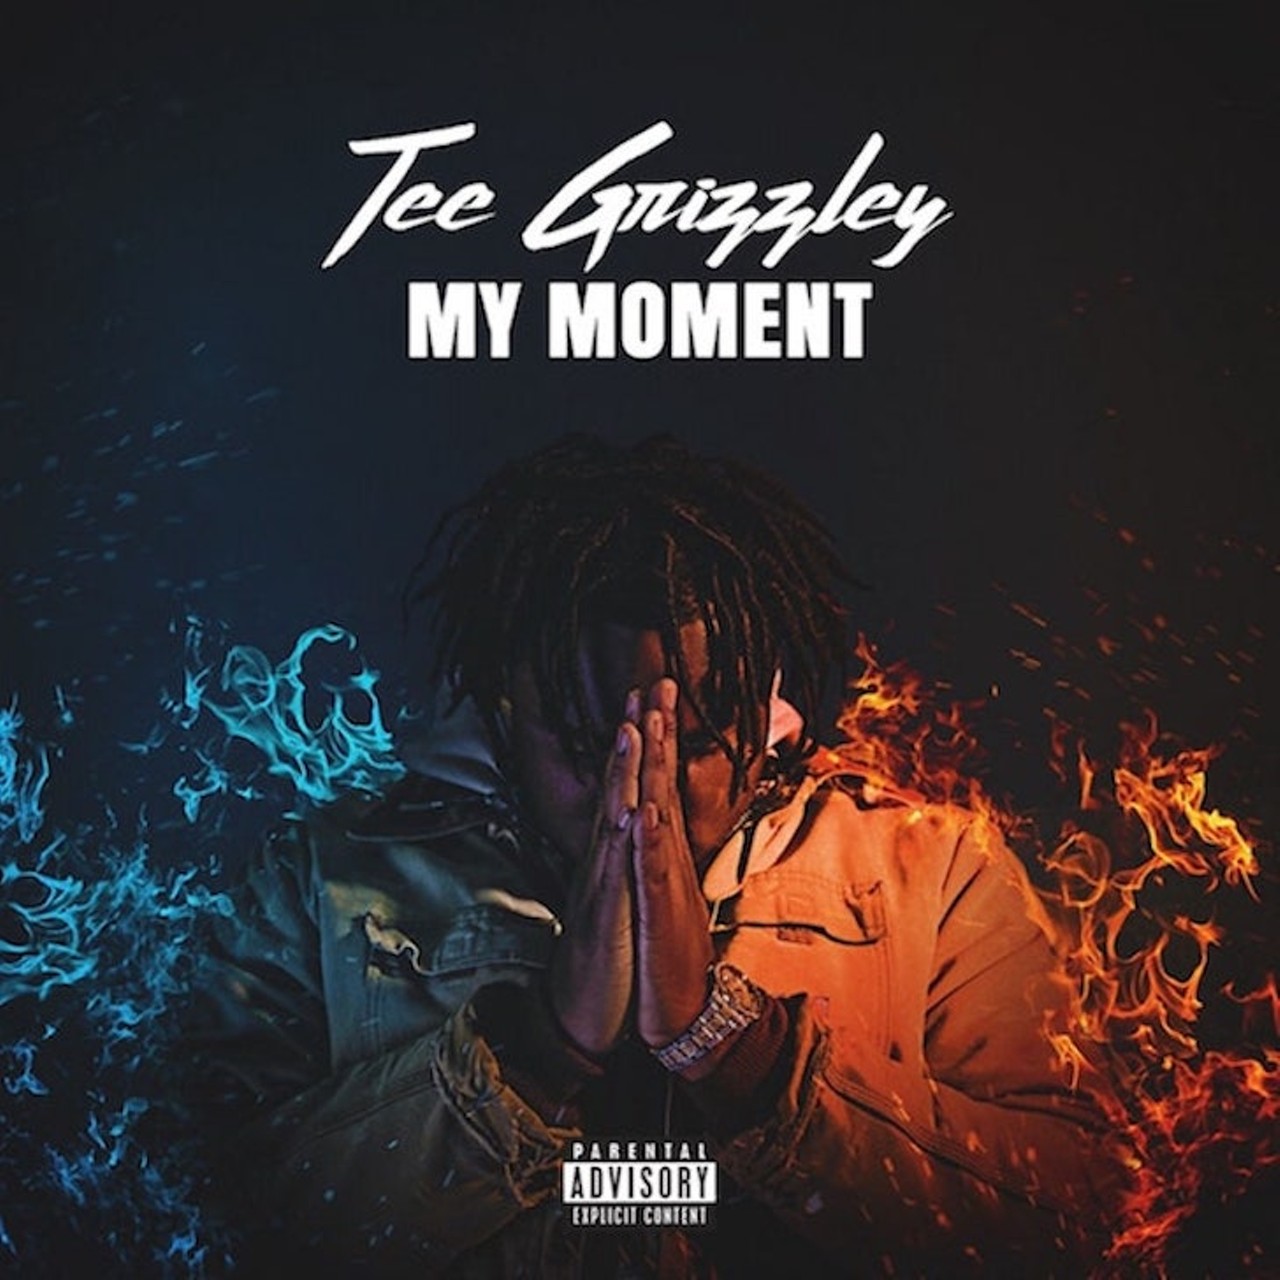 &#147;We made it out of Lansing after all that happened. After Michigan State, after Hubbard, when our mans told on us, them bands they took from us. Joy Road bitch, but the money long as six mile &#133;&#148; - Tee Grizzley, &#148;First Day Out from My Moment
Photo via Spotify